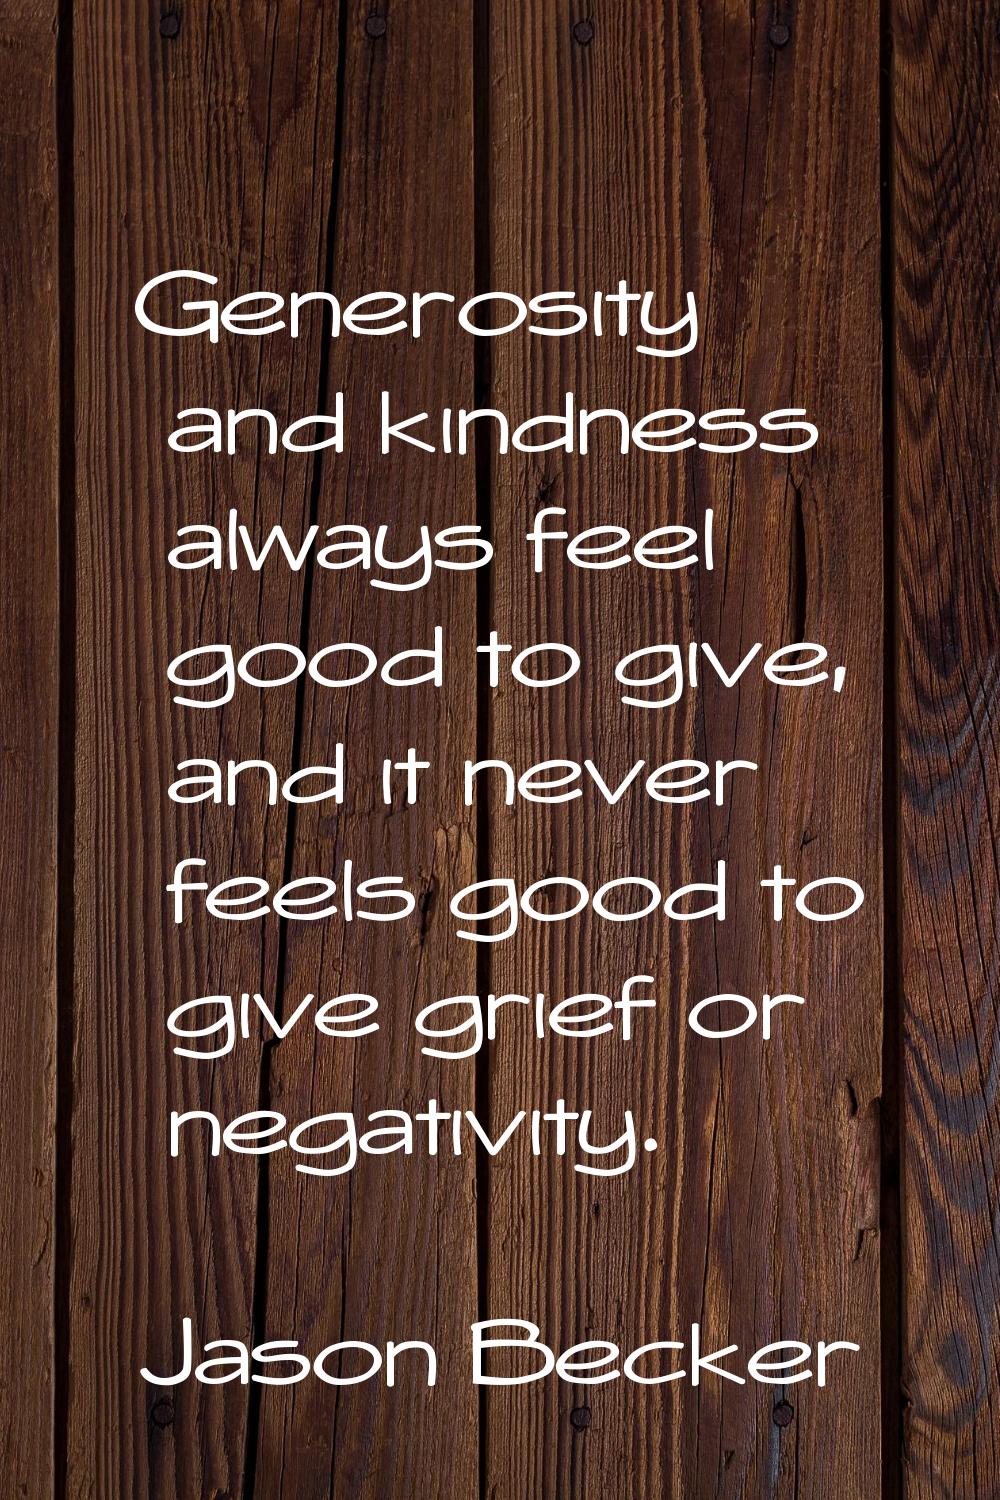 Generosity and kindness always feel good to give, and it never feels good to give grief or negativi